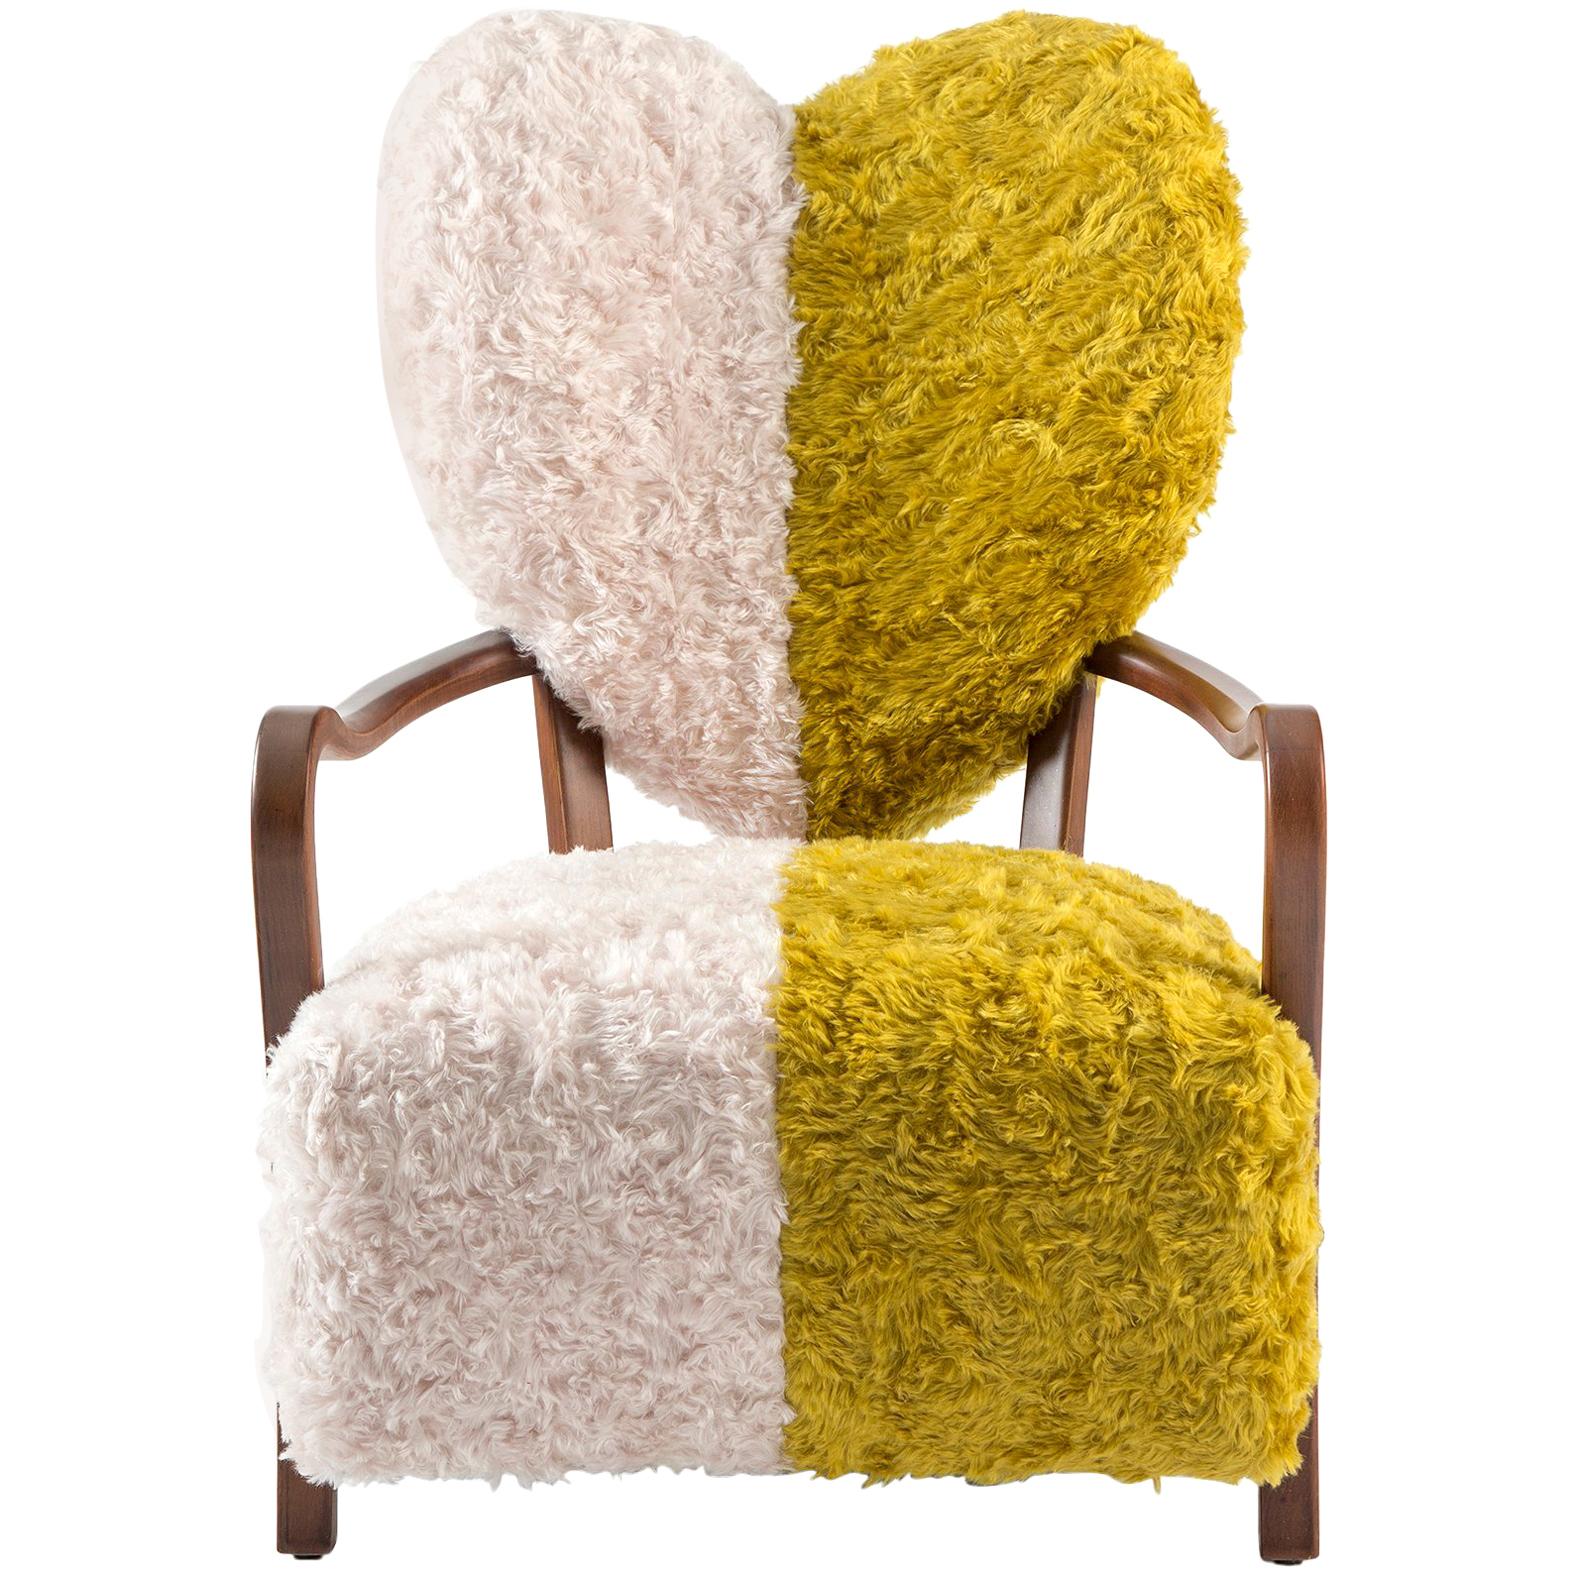 Contemporary Uni Armchair with Heart Shaped Back and Yellow and White Mohair